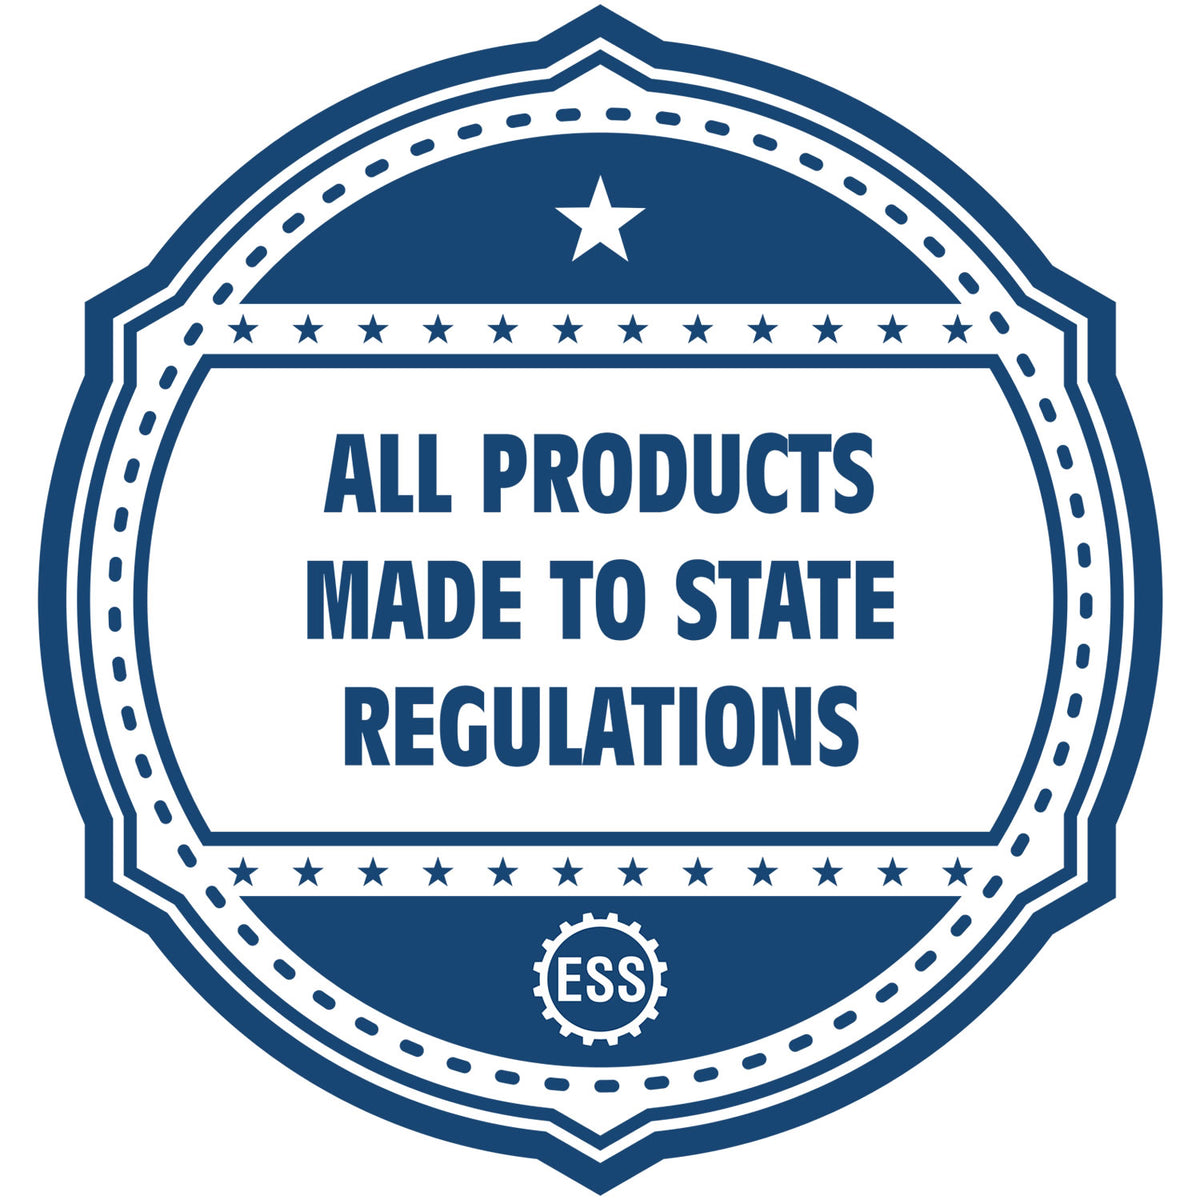 An icon or badge element for the Extended Long Reach Illinois Architect Seal Embosser showing that this product is made in compliance with state regulations.